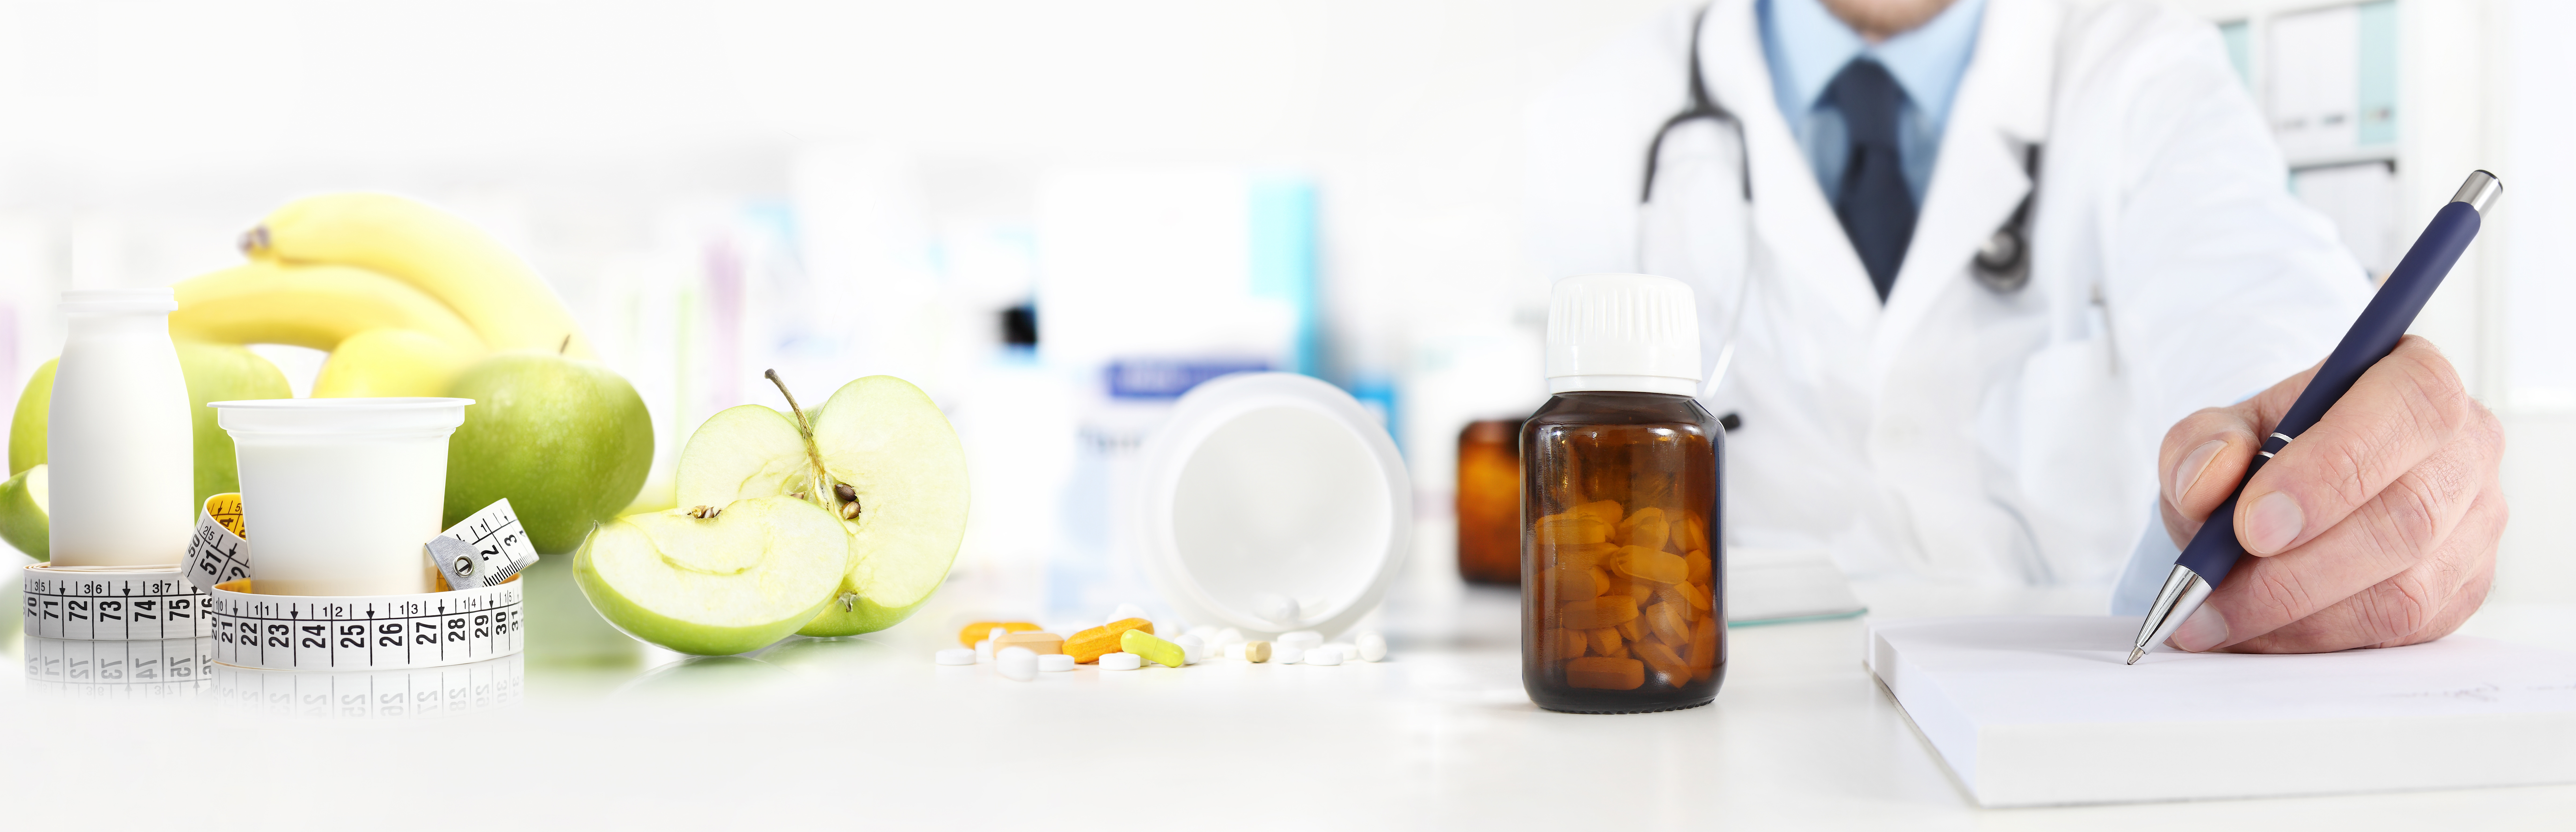 Doctor prescribing medications at a table with apples and jar of medications